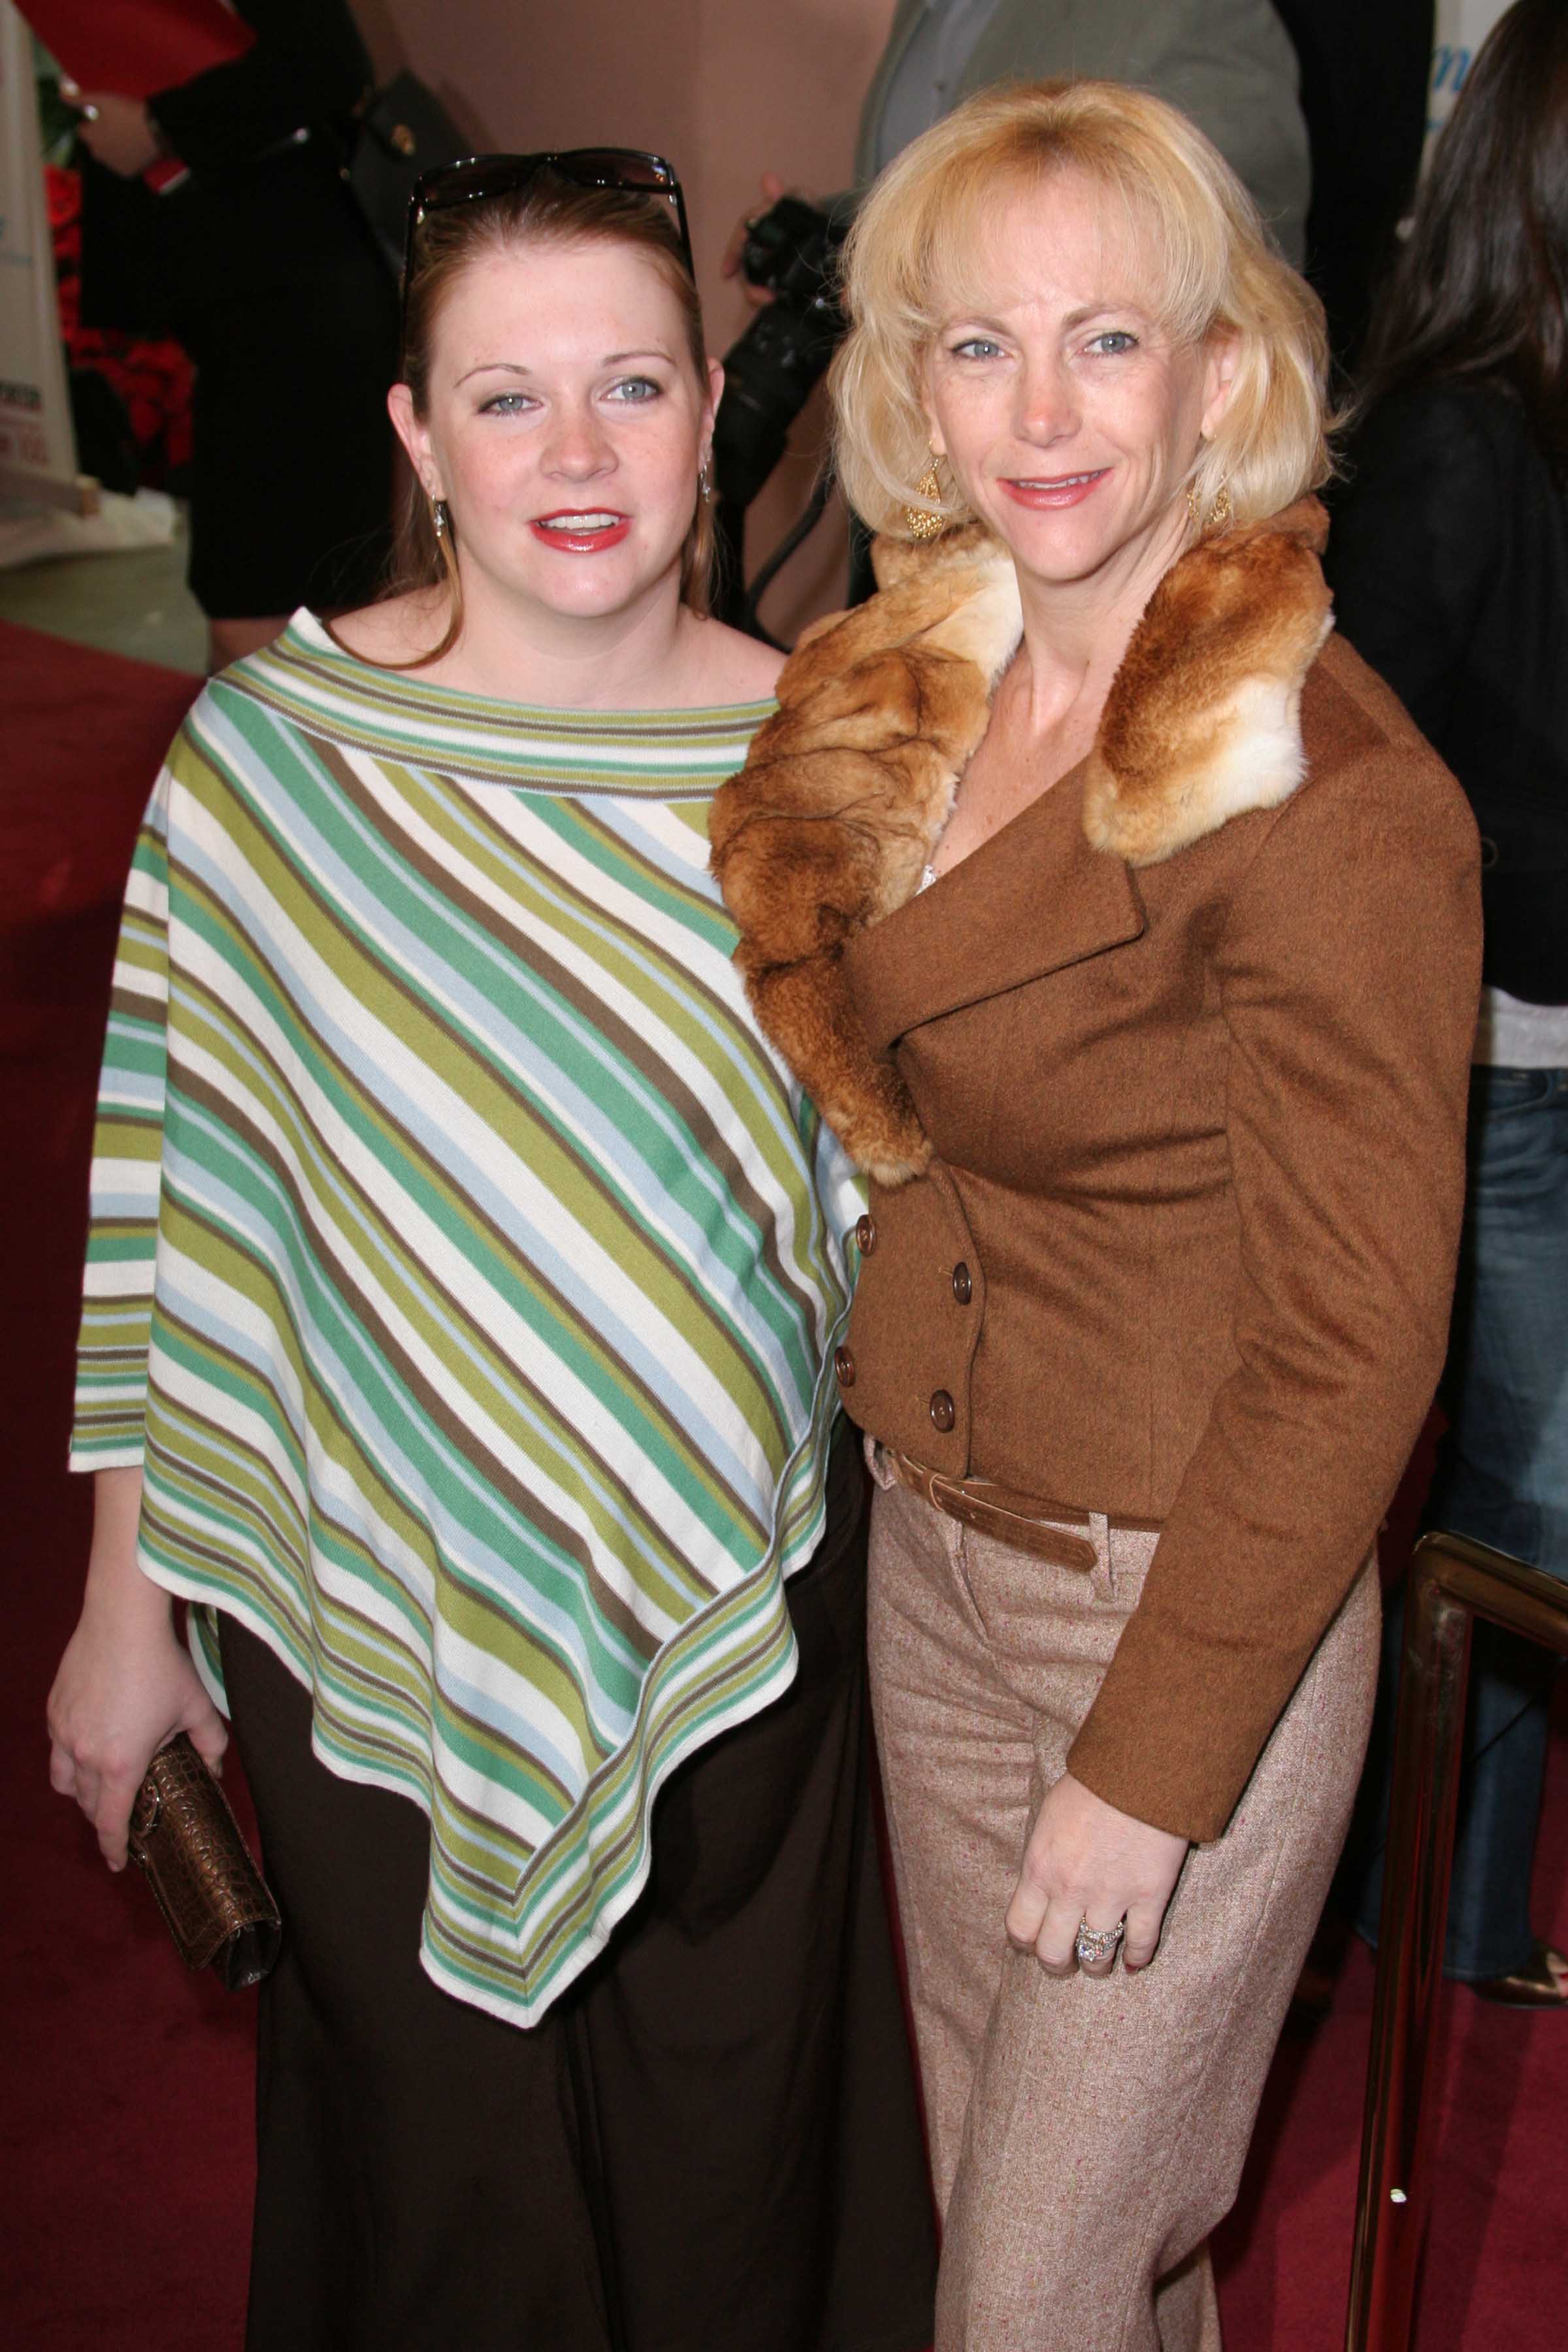 Melissa Joan Hart and Paula Hart attend The Hollywood Reporter's Women In Entertainment Power 100 Breakfast in Beverly Hills, California, on December 6, 2005. | Source: Getty Images